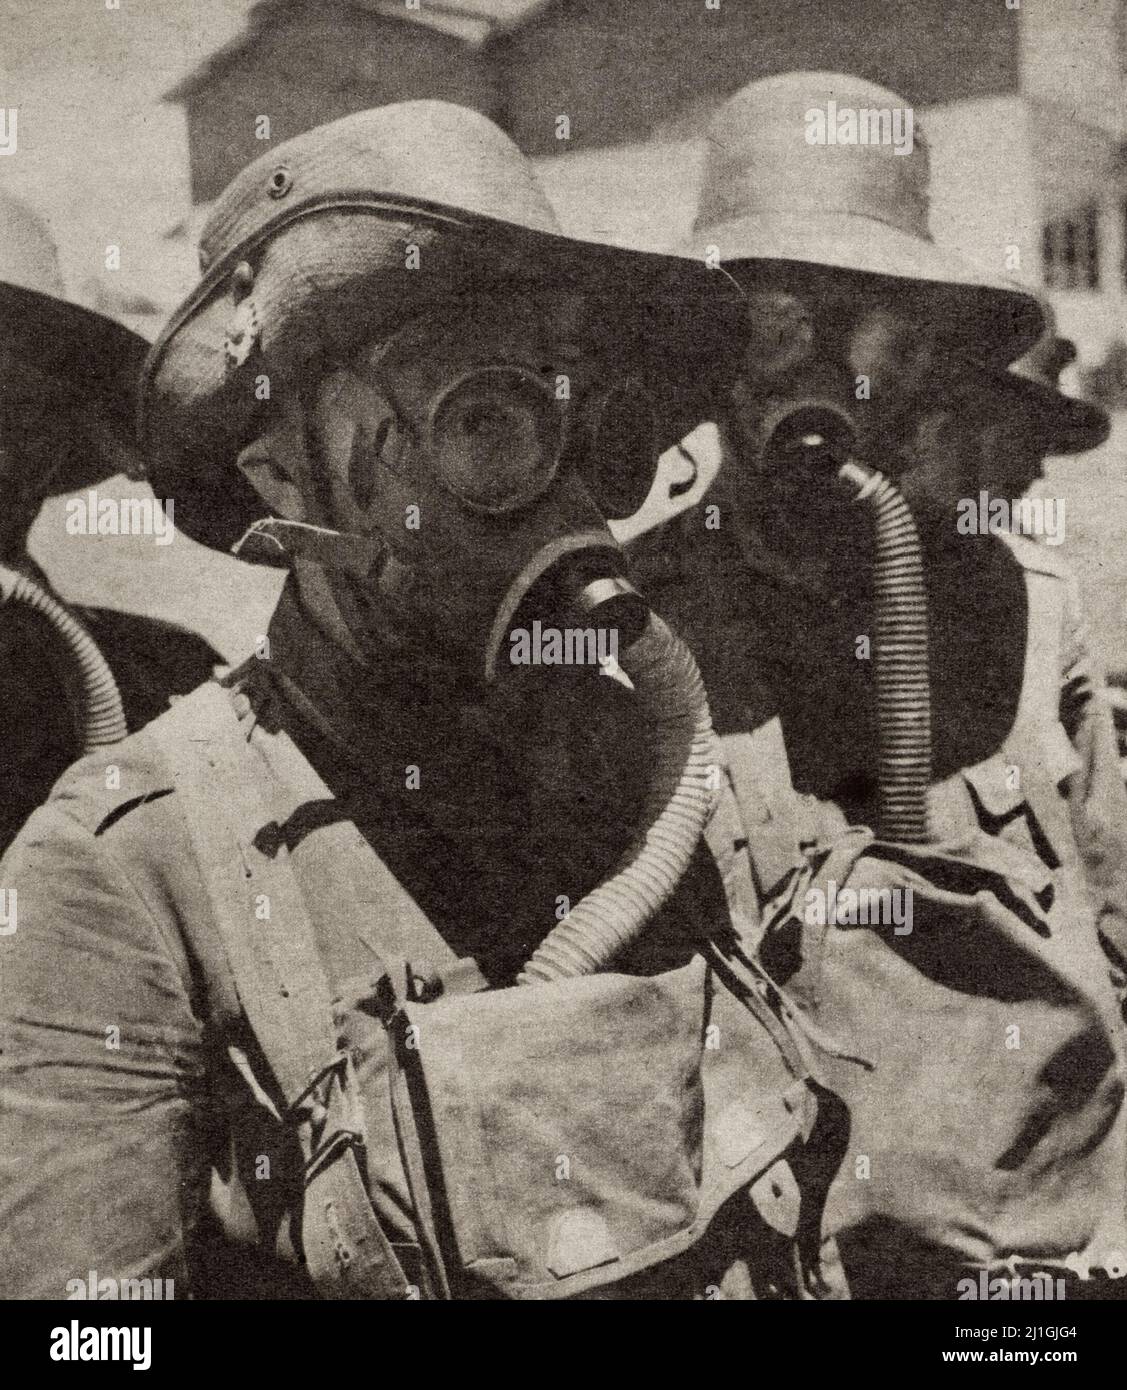 World War II period. Holland in battle. 1942 A new model of gas masks is used by the Dutch East Indies army. Stock Photo